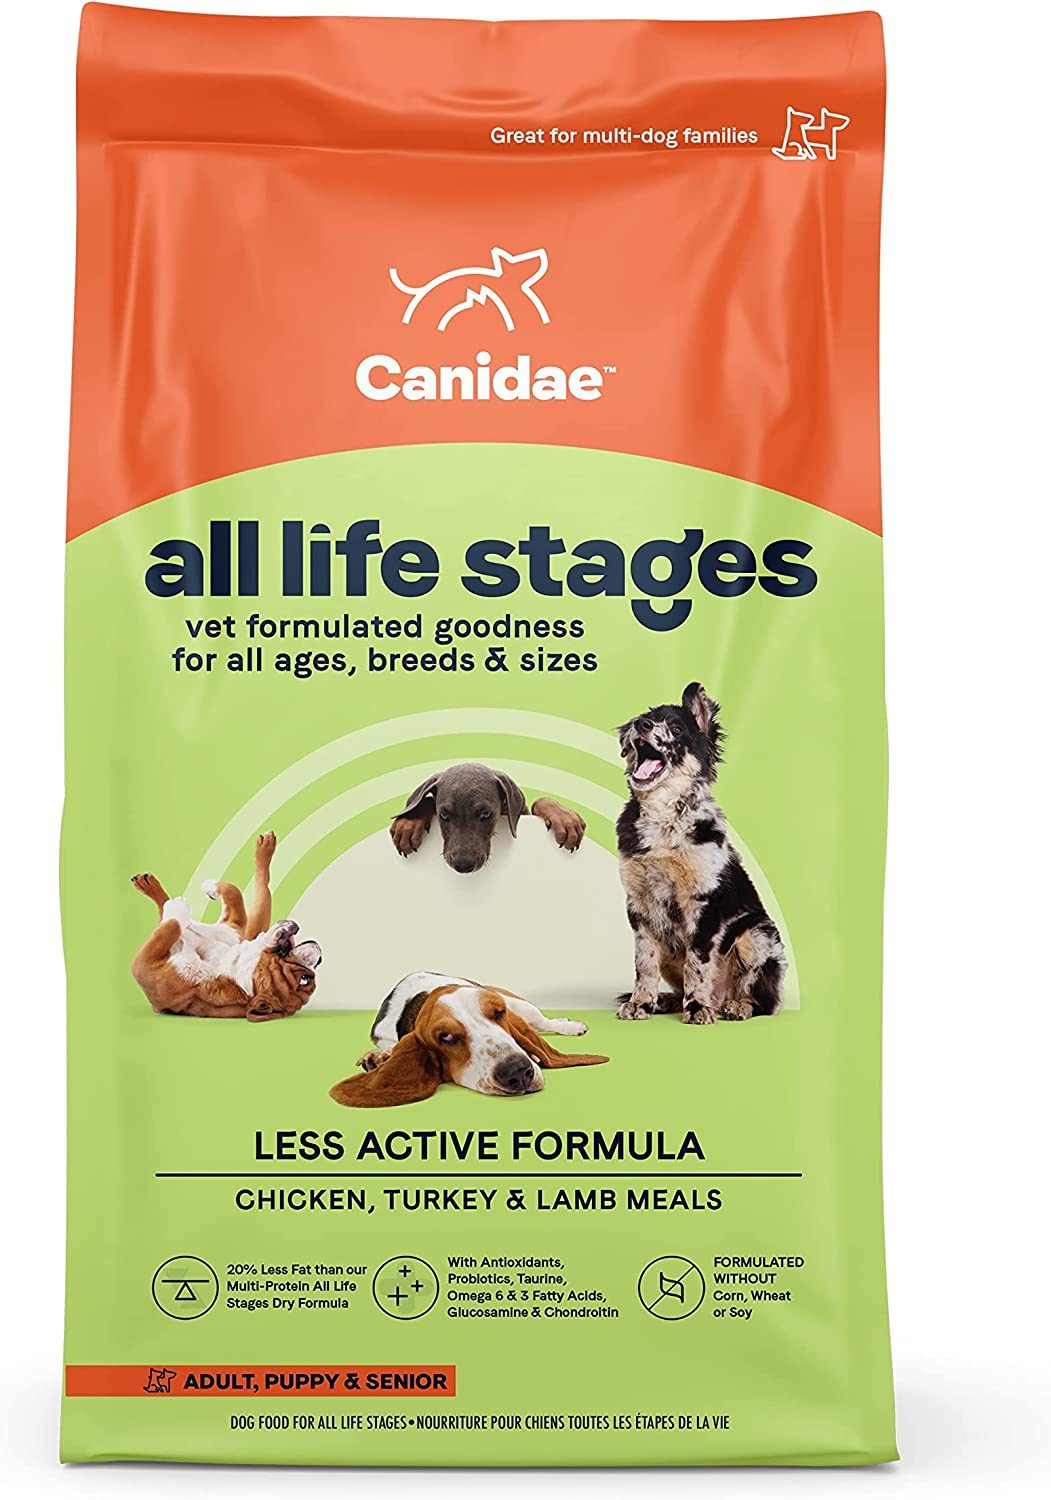 All Life Stages Premium Dry Dog Food for Less Active Dogs, All Ages Chicken, Turkey and Lamb Meals Formula, 15 Pounds